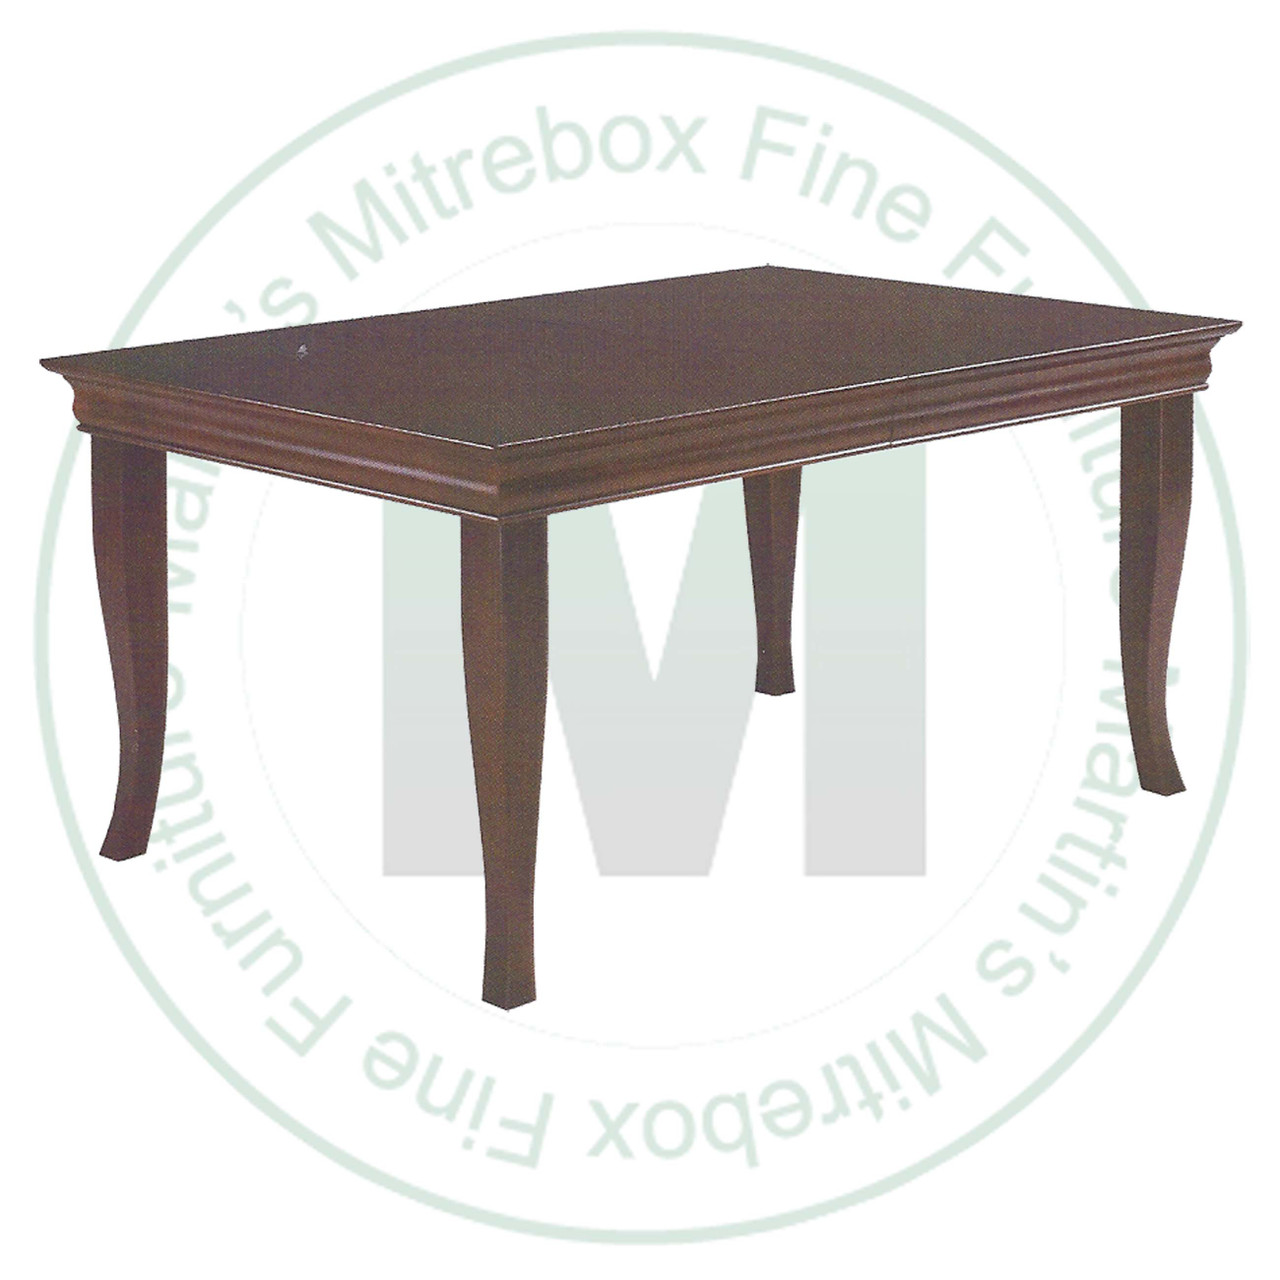 Oak French Riviera Extension Harvest Table 36''D x 72''W x 30''H With 3 - 12'' Leaves